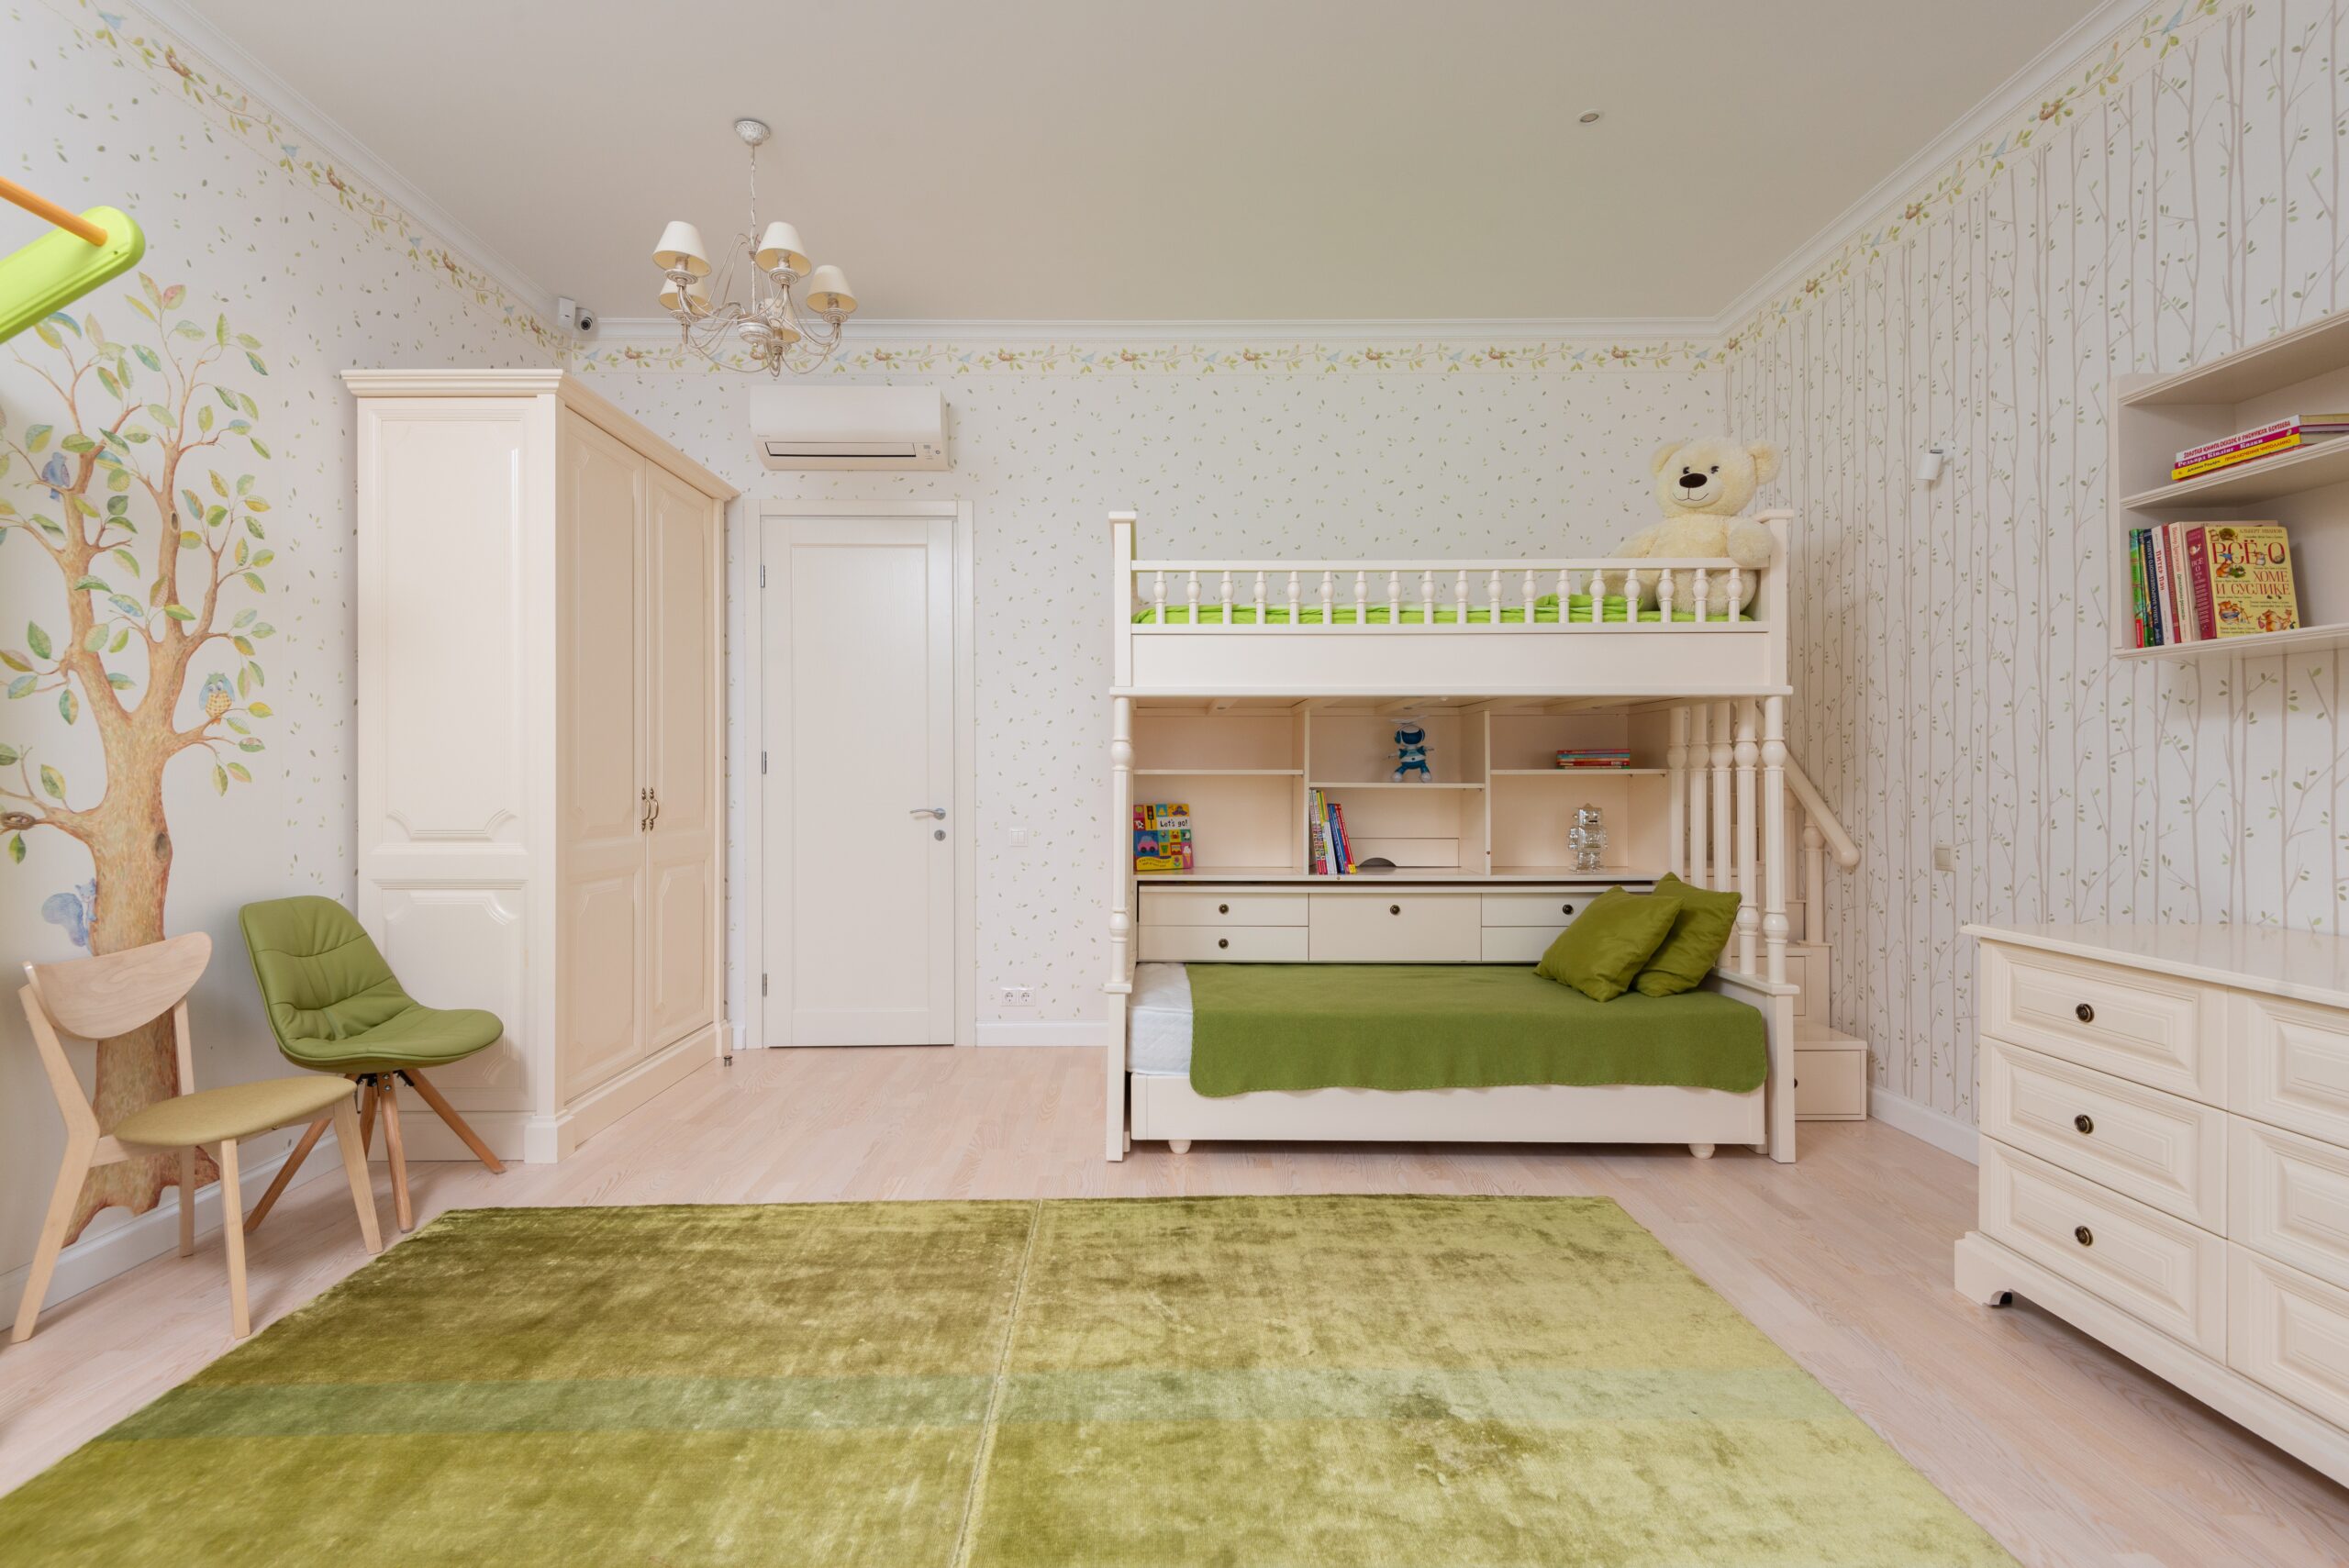 A kid-friendly sage green bedroom idea. Pictured: A green bedroom.